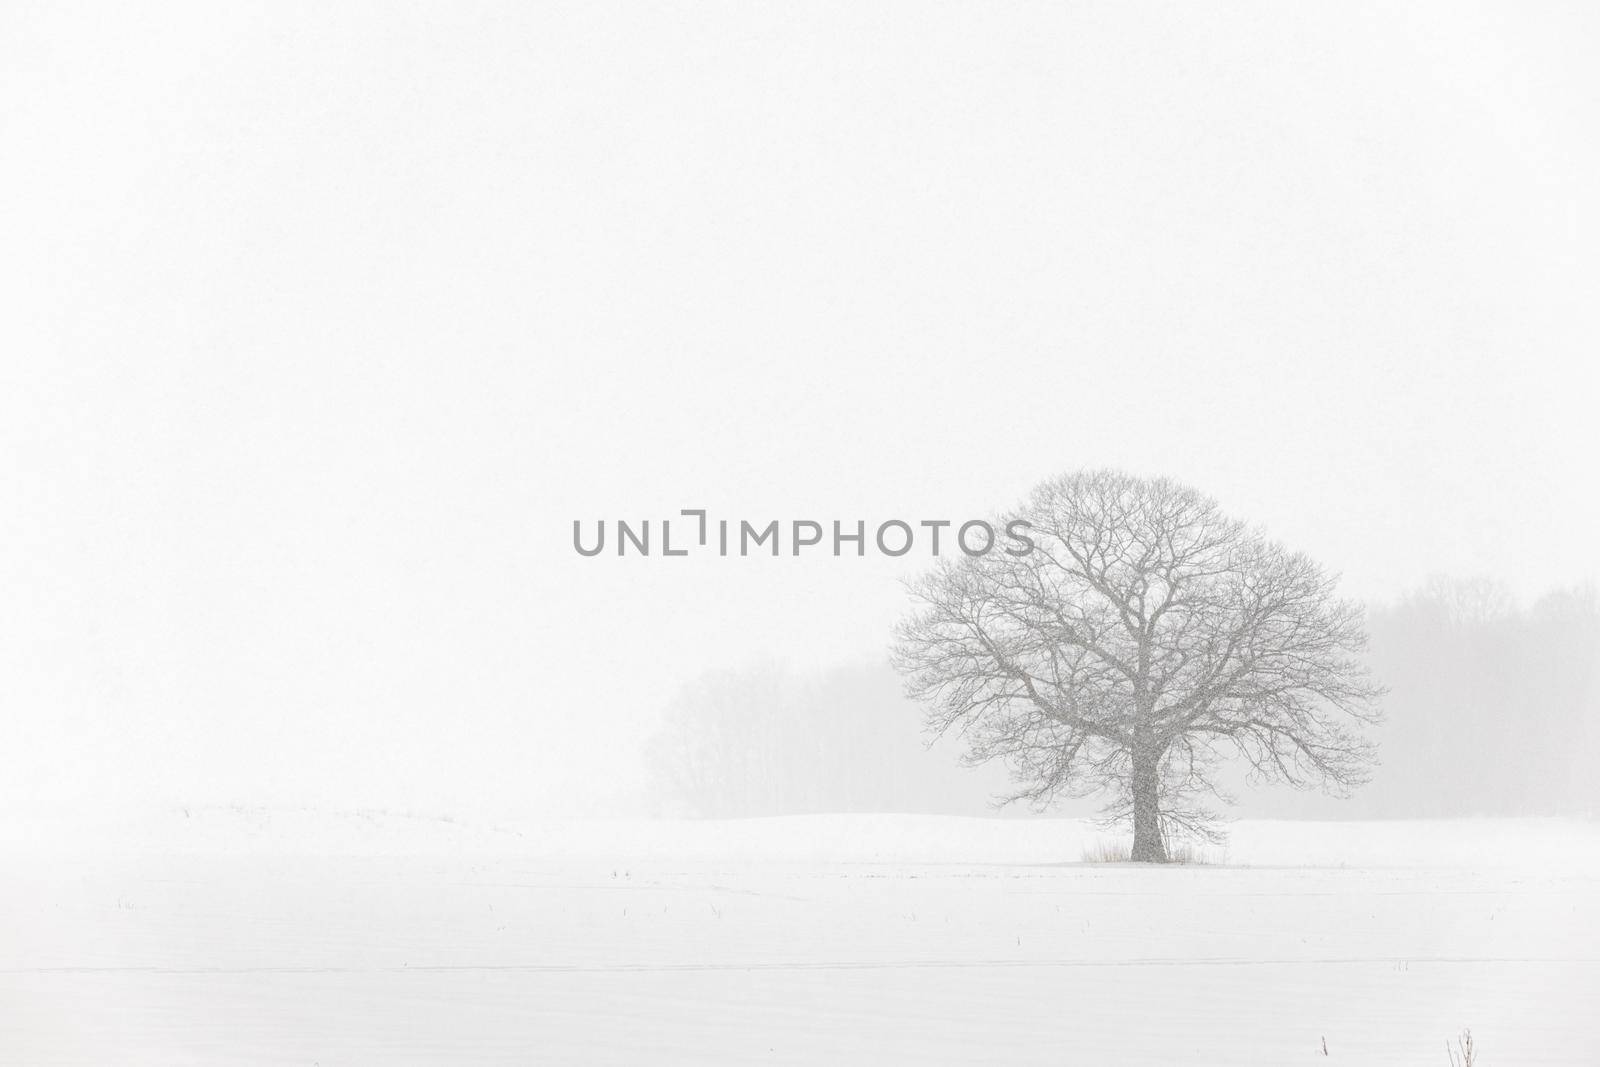 Lone Tree in a Farm Field in a Winter Snow Storm with White Out Conditions. Plenty of copy space. High quality photo